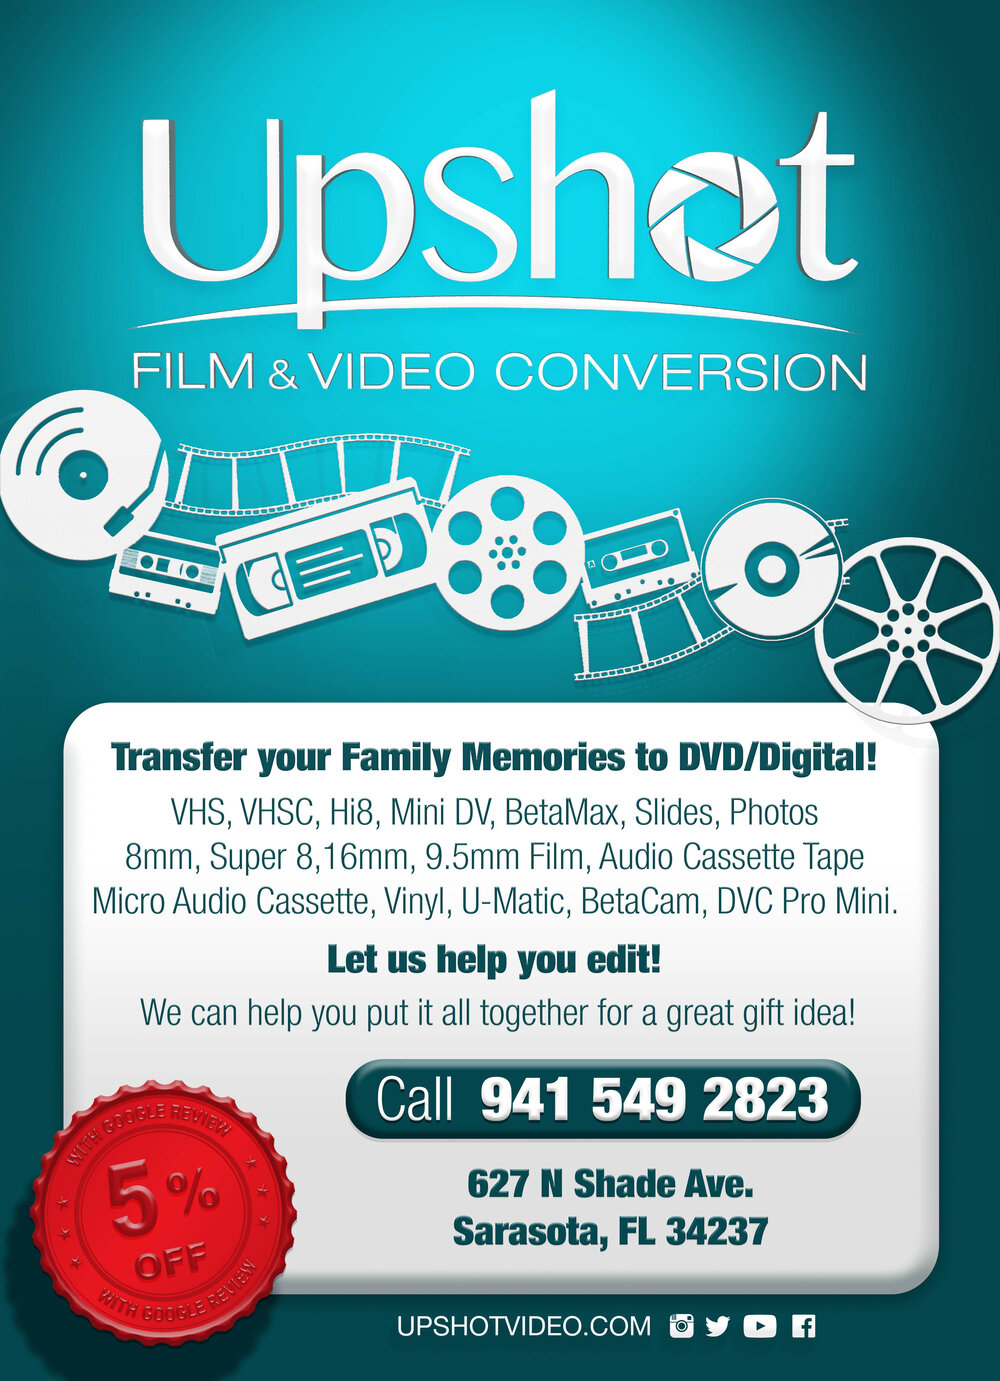 Posible Motivación Tentación Upshot Video Productions - VHS to DVD - In-house Video Transfer Service  based in Sarasota, FL - Also Super 8 to DVD, 8mm to DVD, Hi8 to DVD, Mini  DV to DVD,